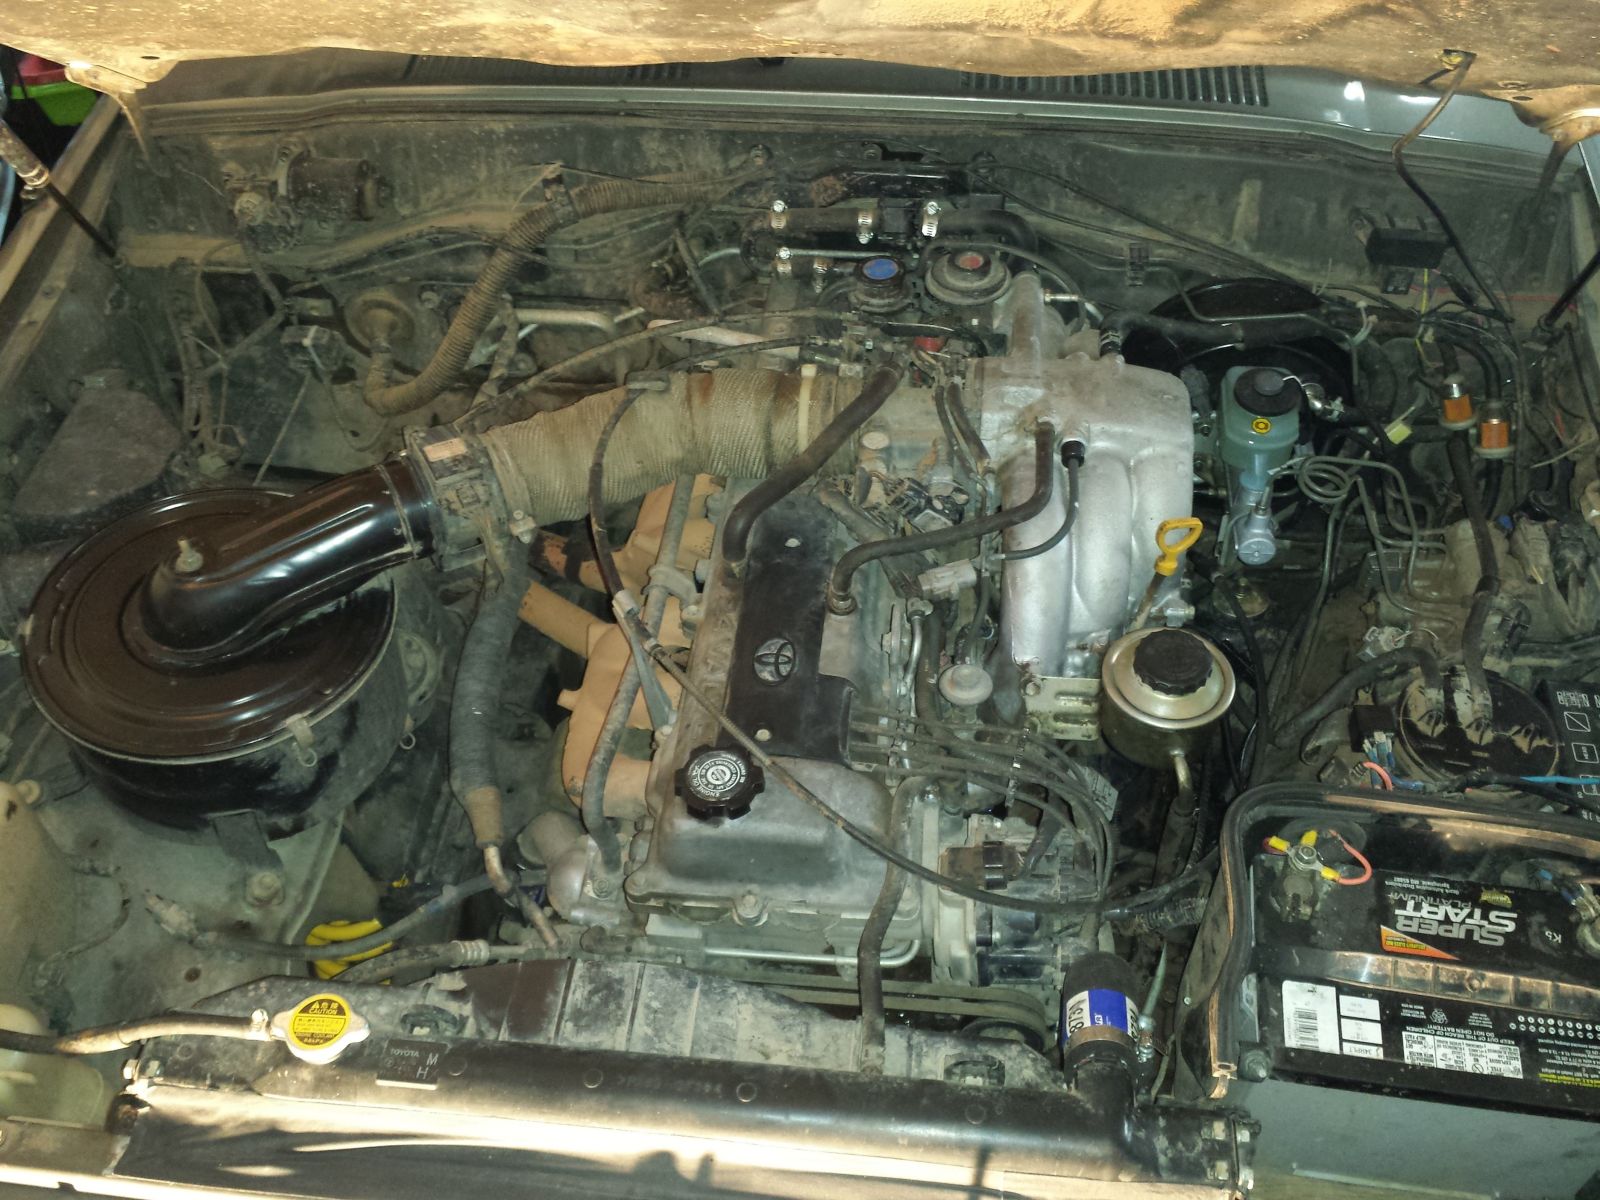 I even cleaned the engine bay.  Nothing would stop me this time!